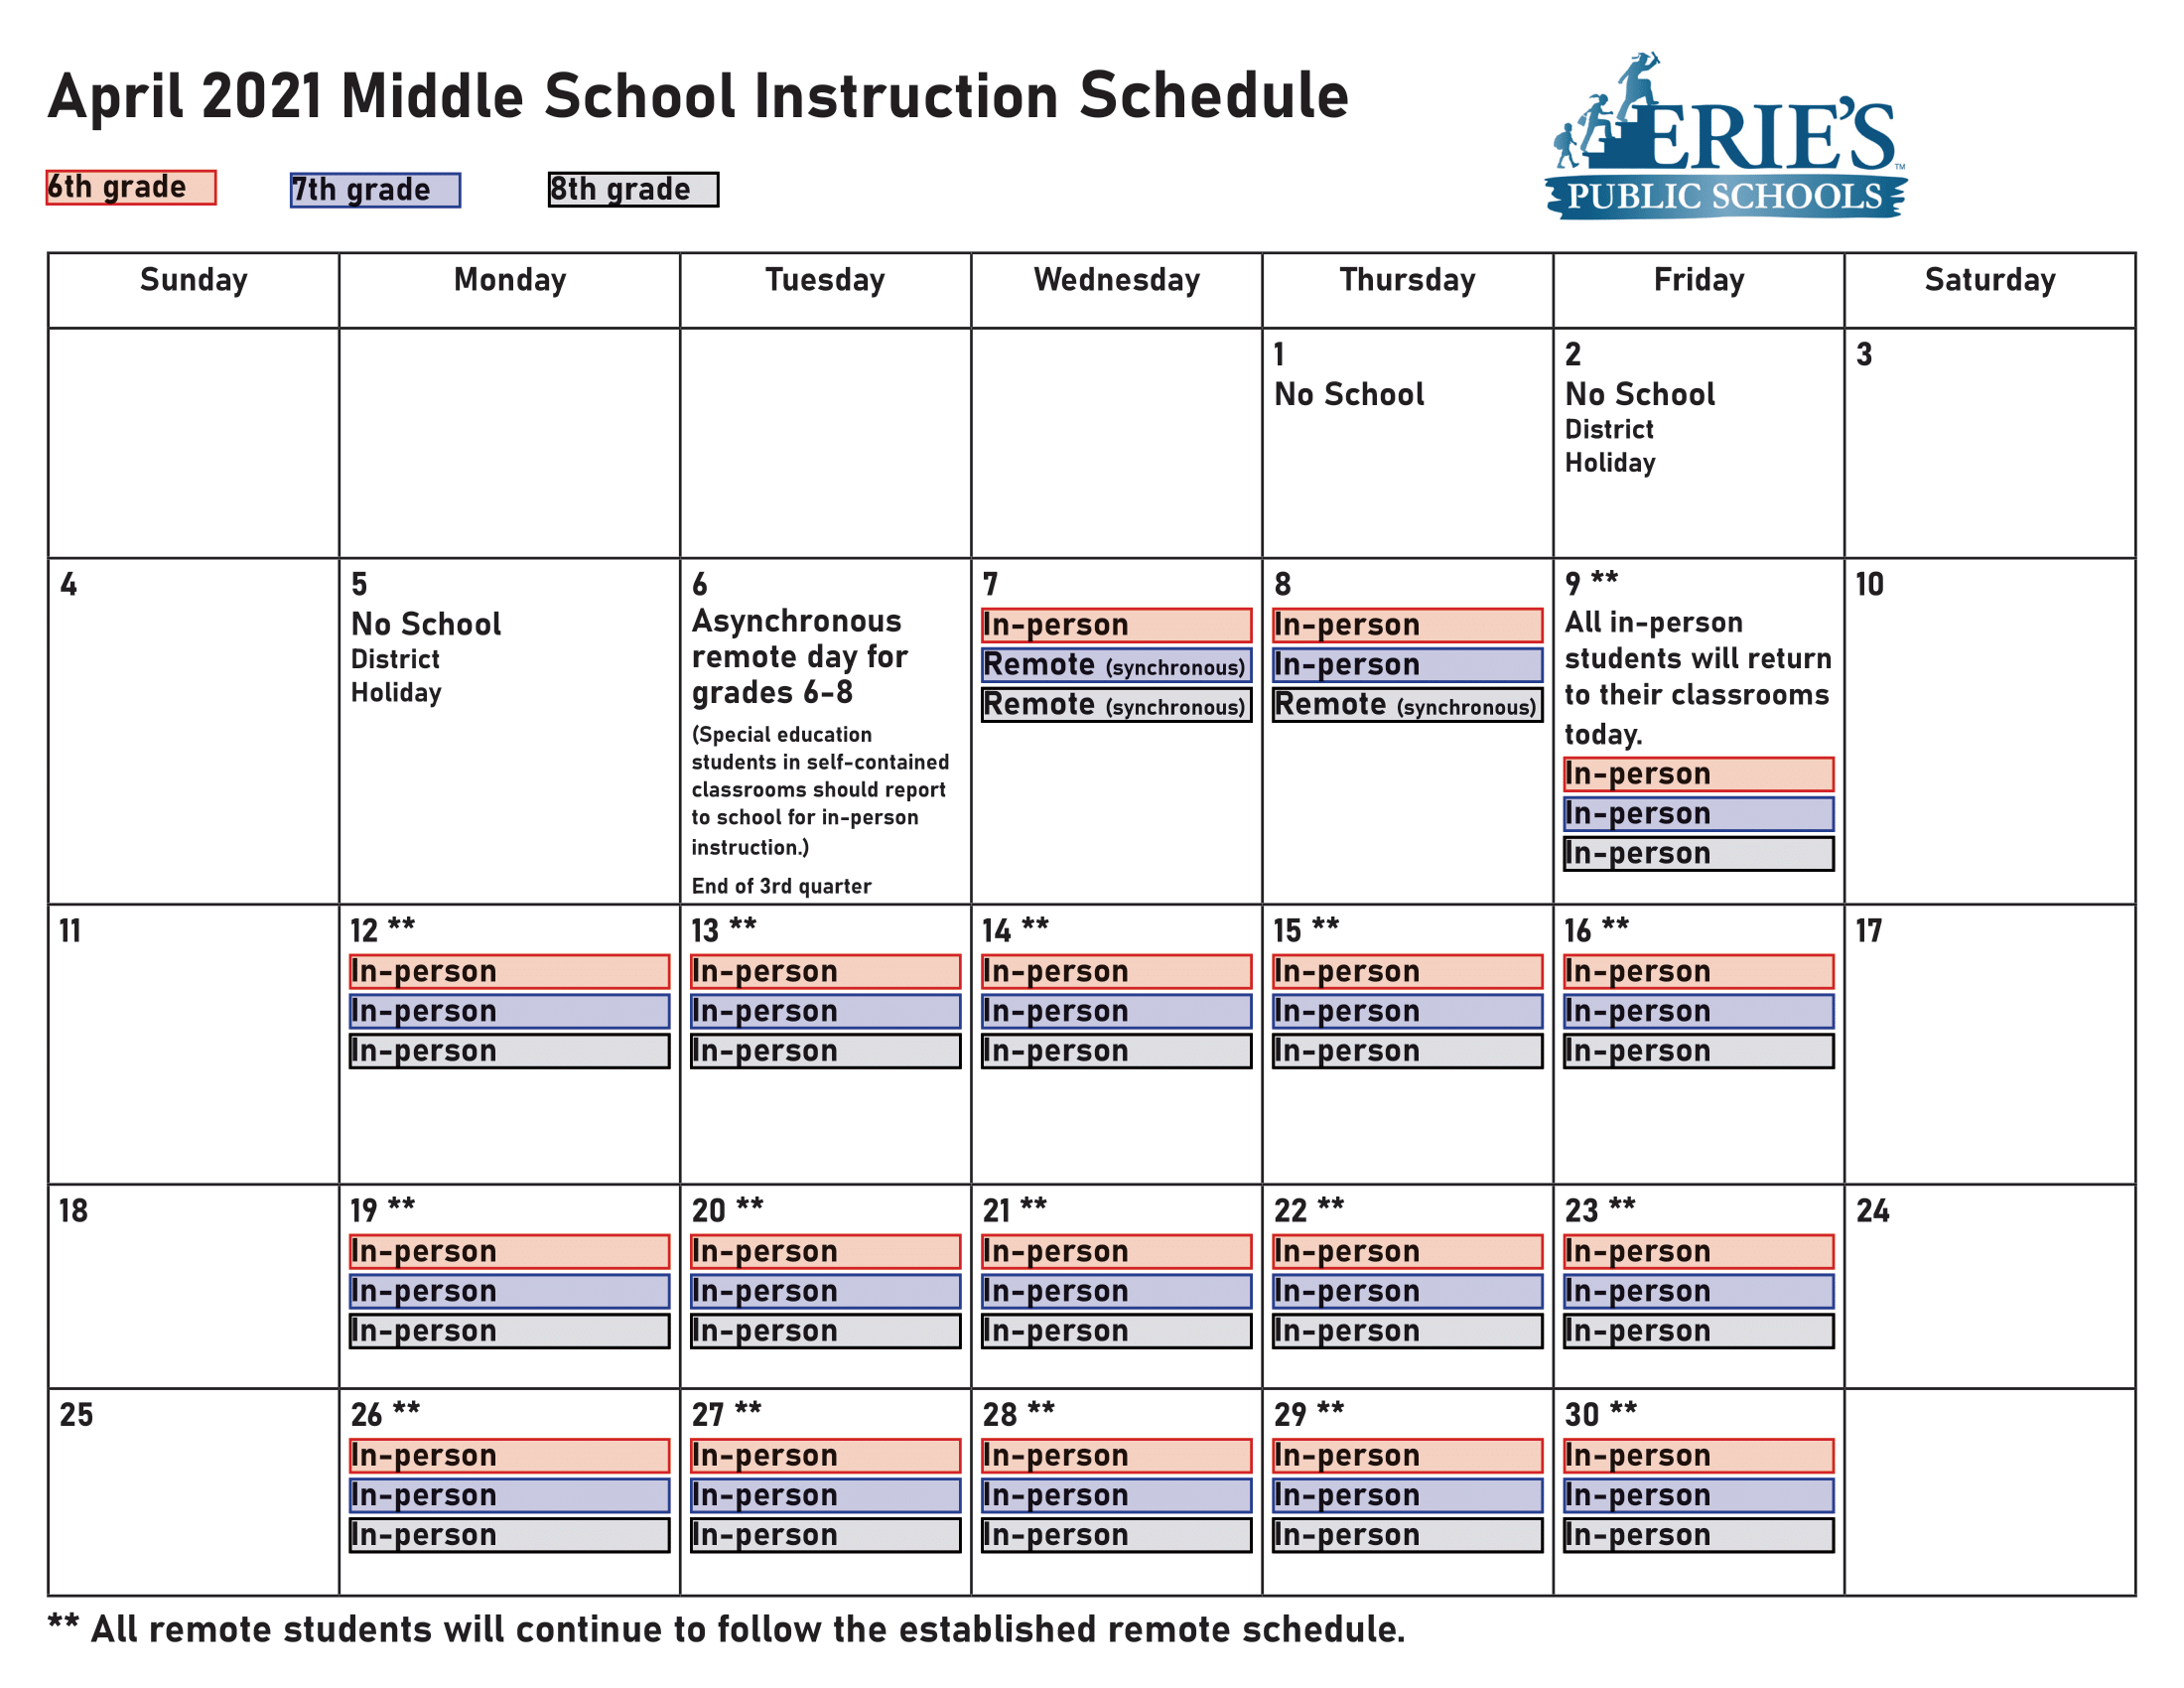 Return to In-Person Instruction Schedule Middle School 